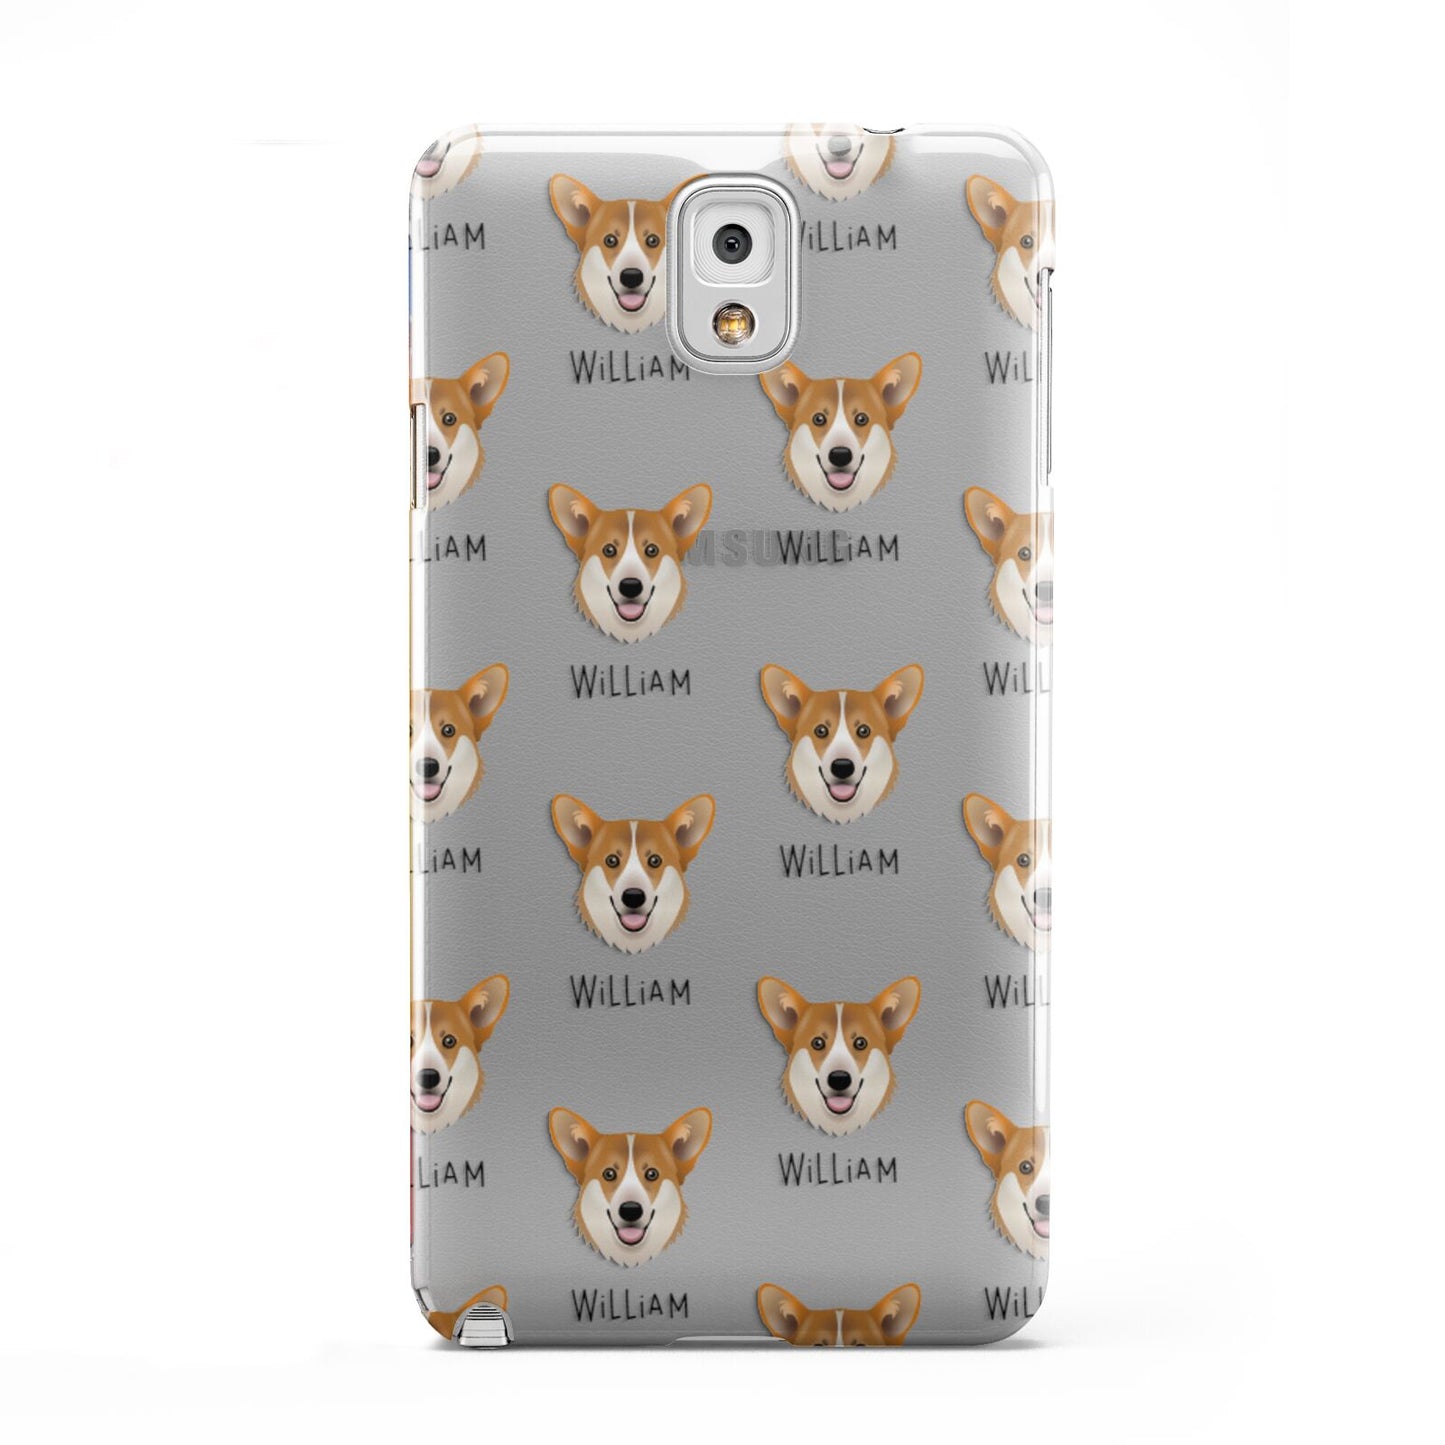 Pembroke Welsh Corgi Icon with Name Samsung Galaxy Note 3 Case